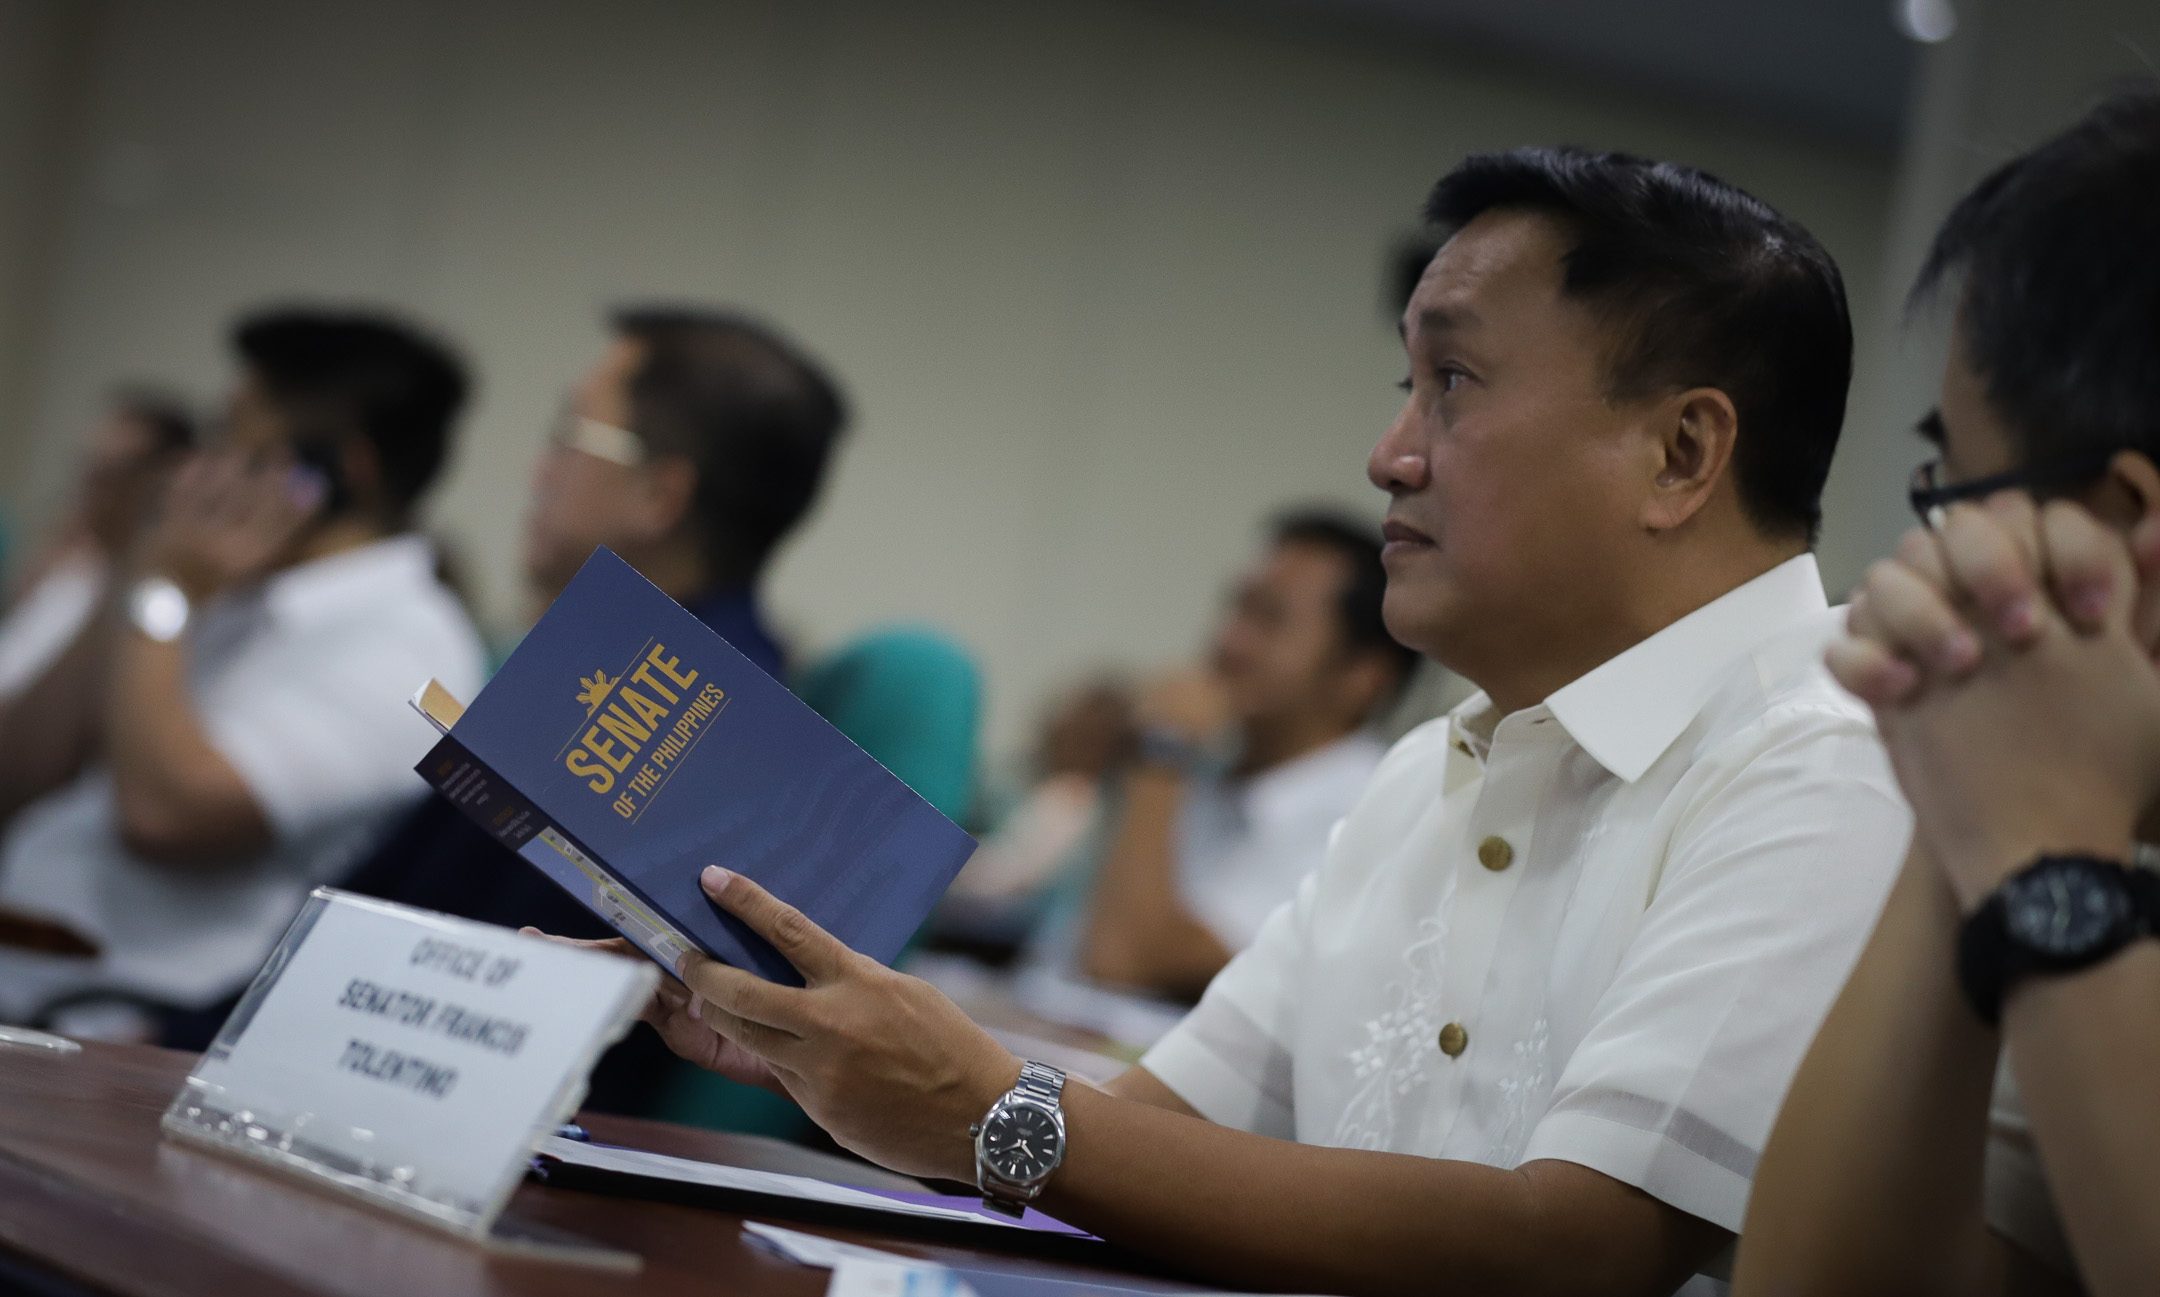 EARLY BIRD. Senator-elect Francis Tolentino is the first to arrive at the briefing for  neophyte senators on June 25, 209. Photo by Jospeh Vidal/Senate PRIB 